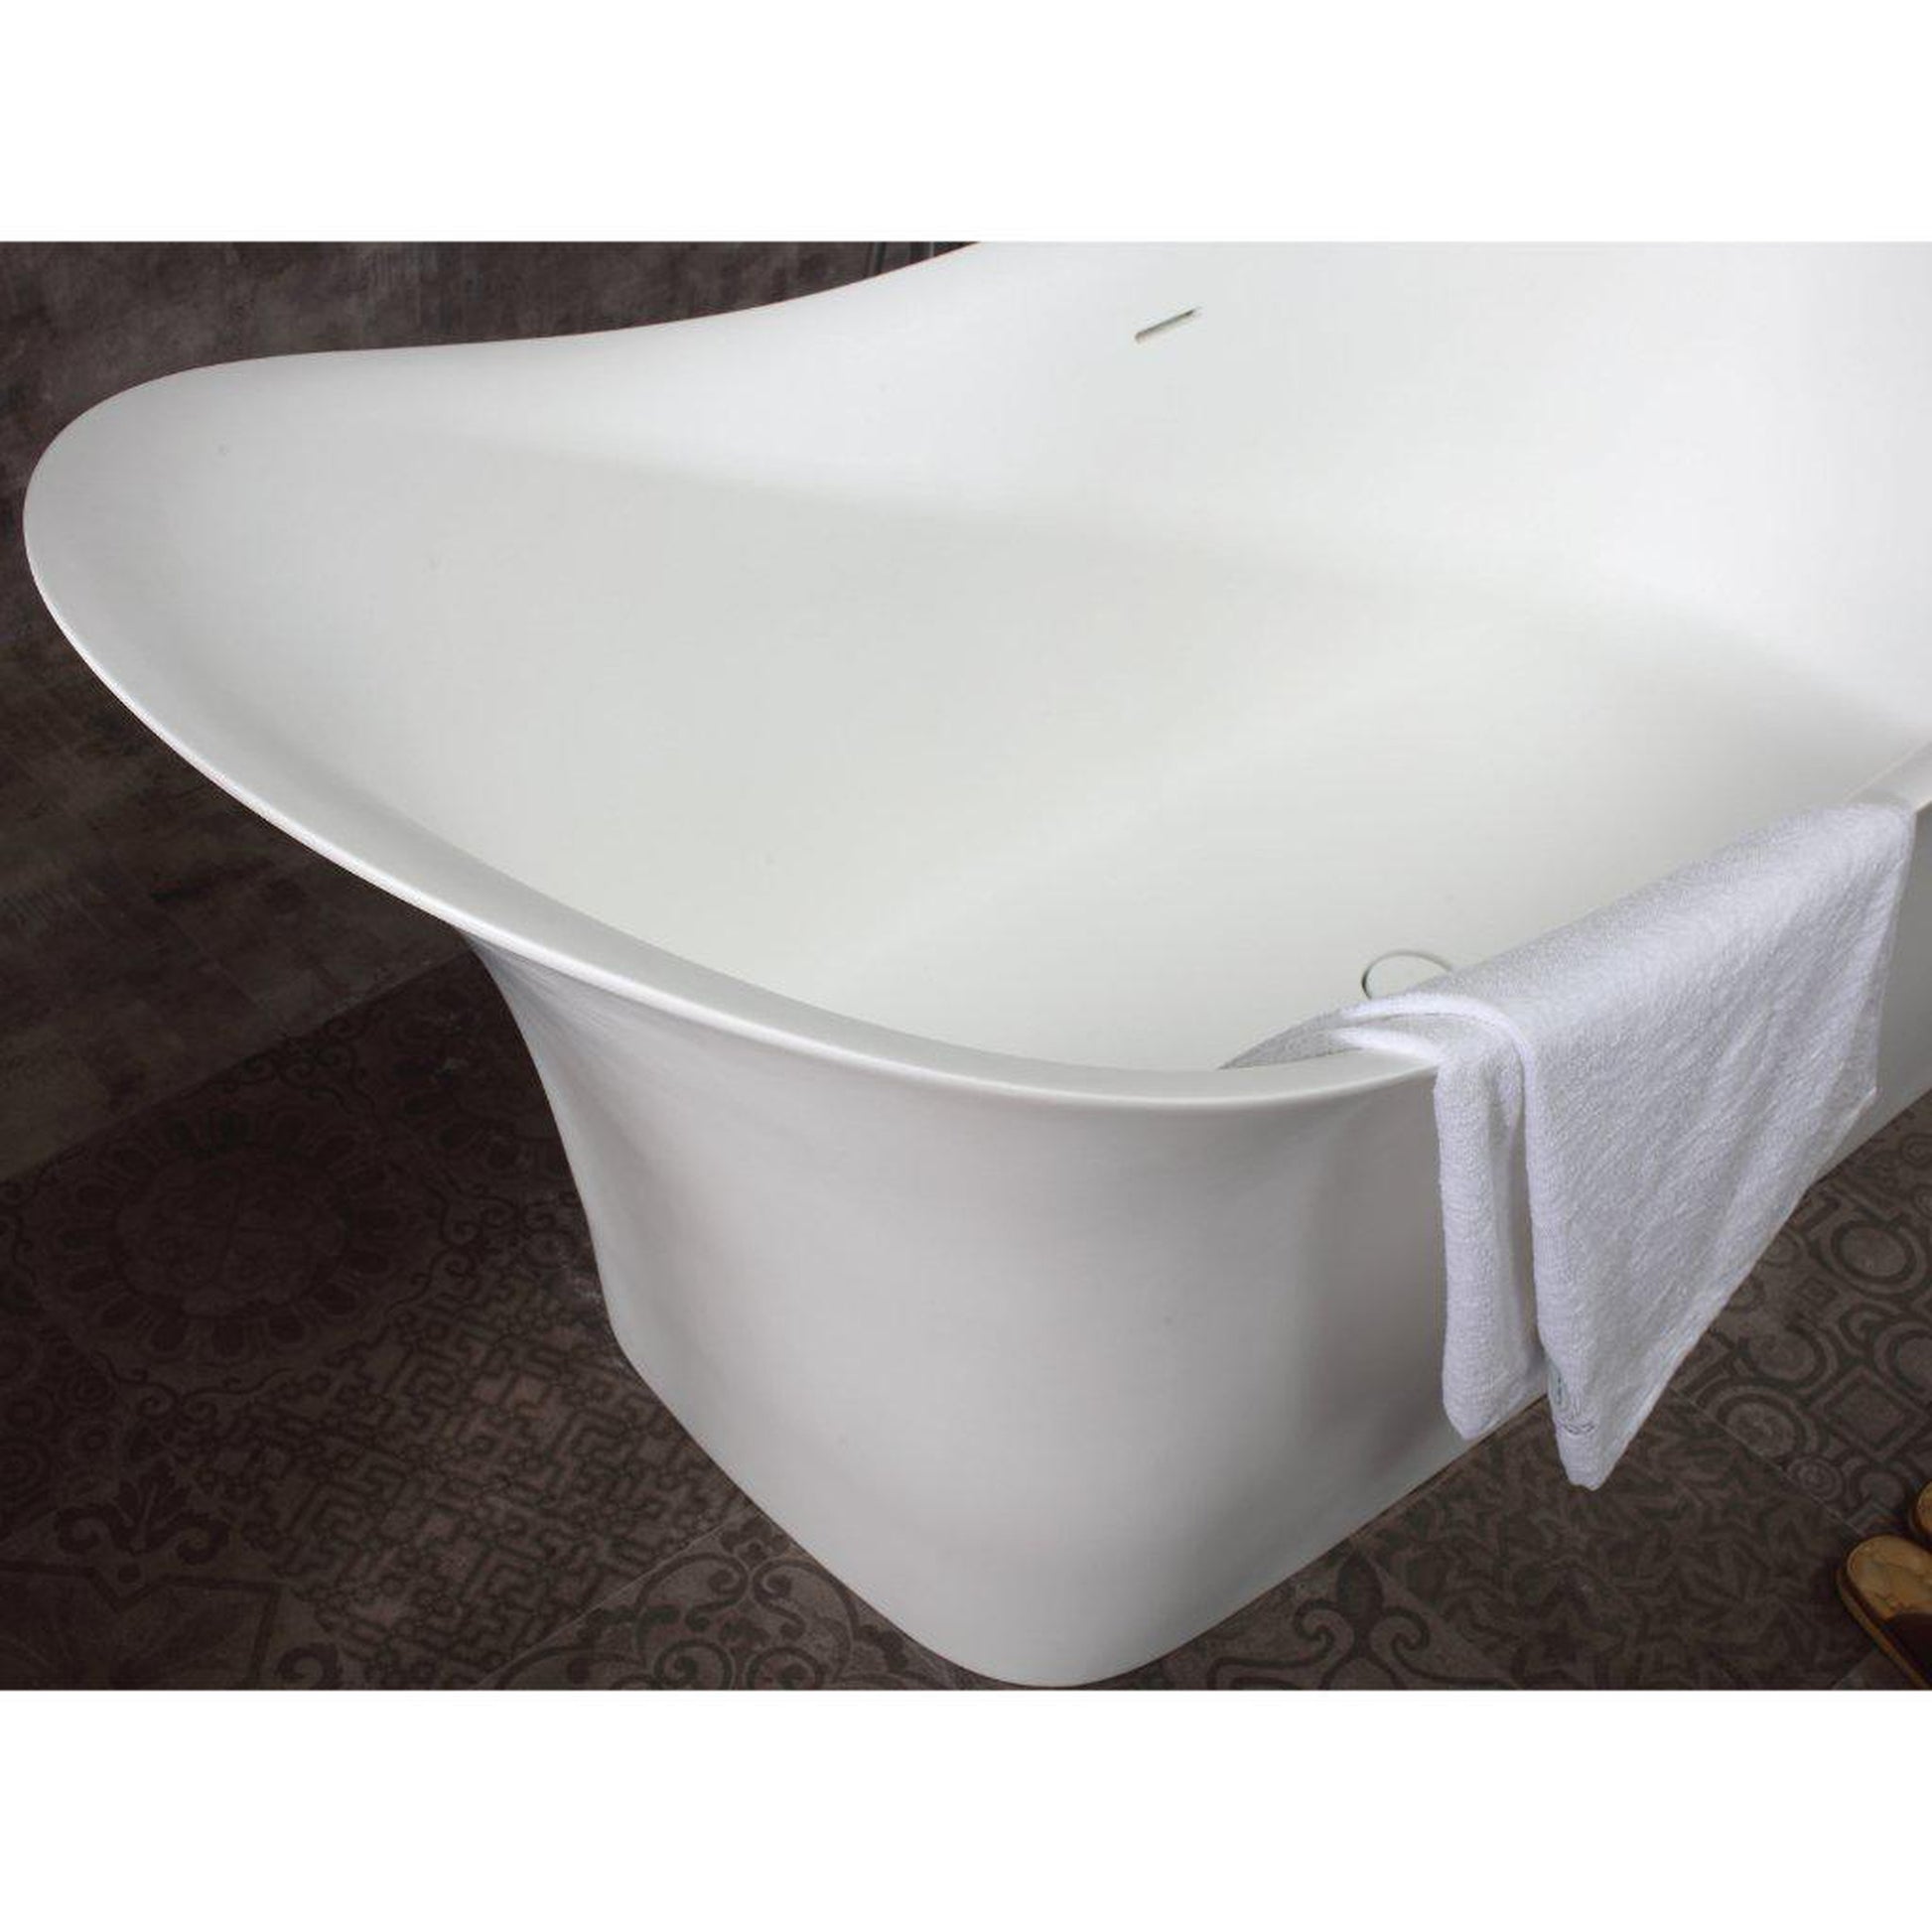 ALFI Brand AB9915 74" One Person Freestanding White Solid Surface Smooth Resin Soaking Slipper Bathtub